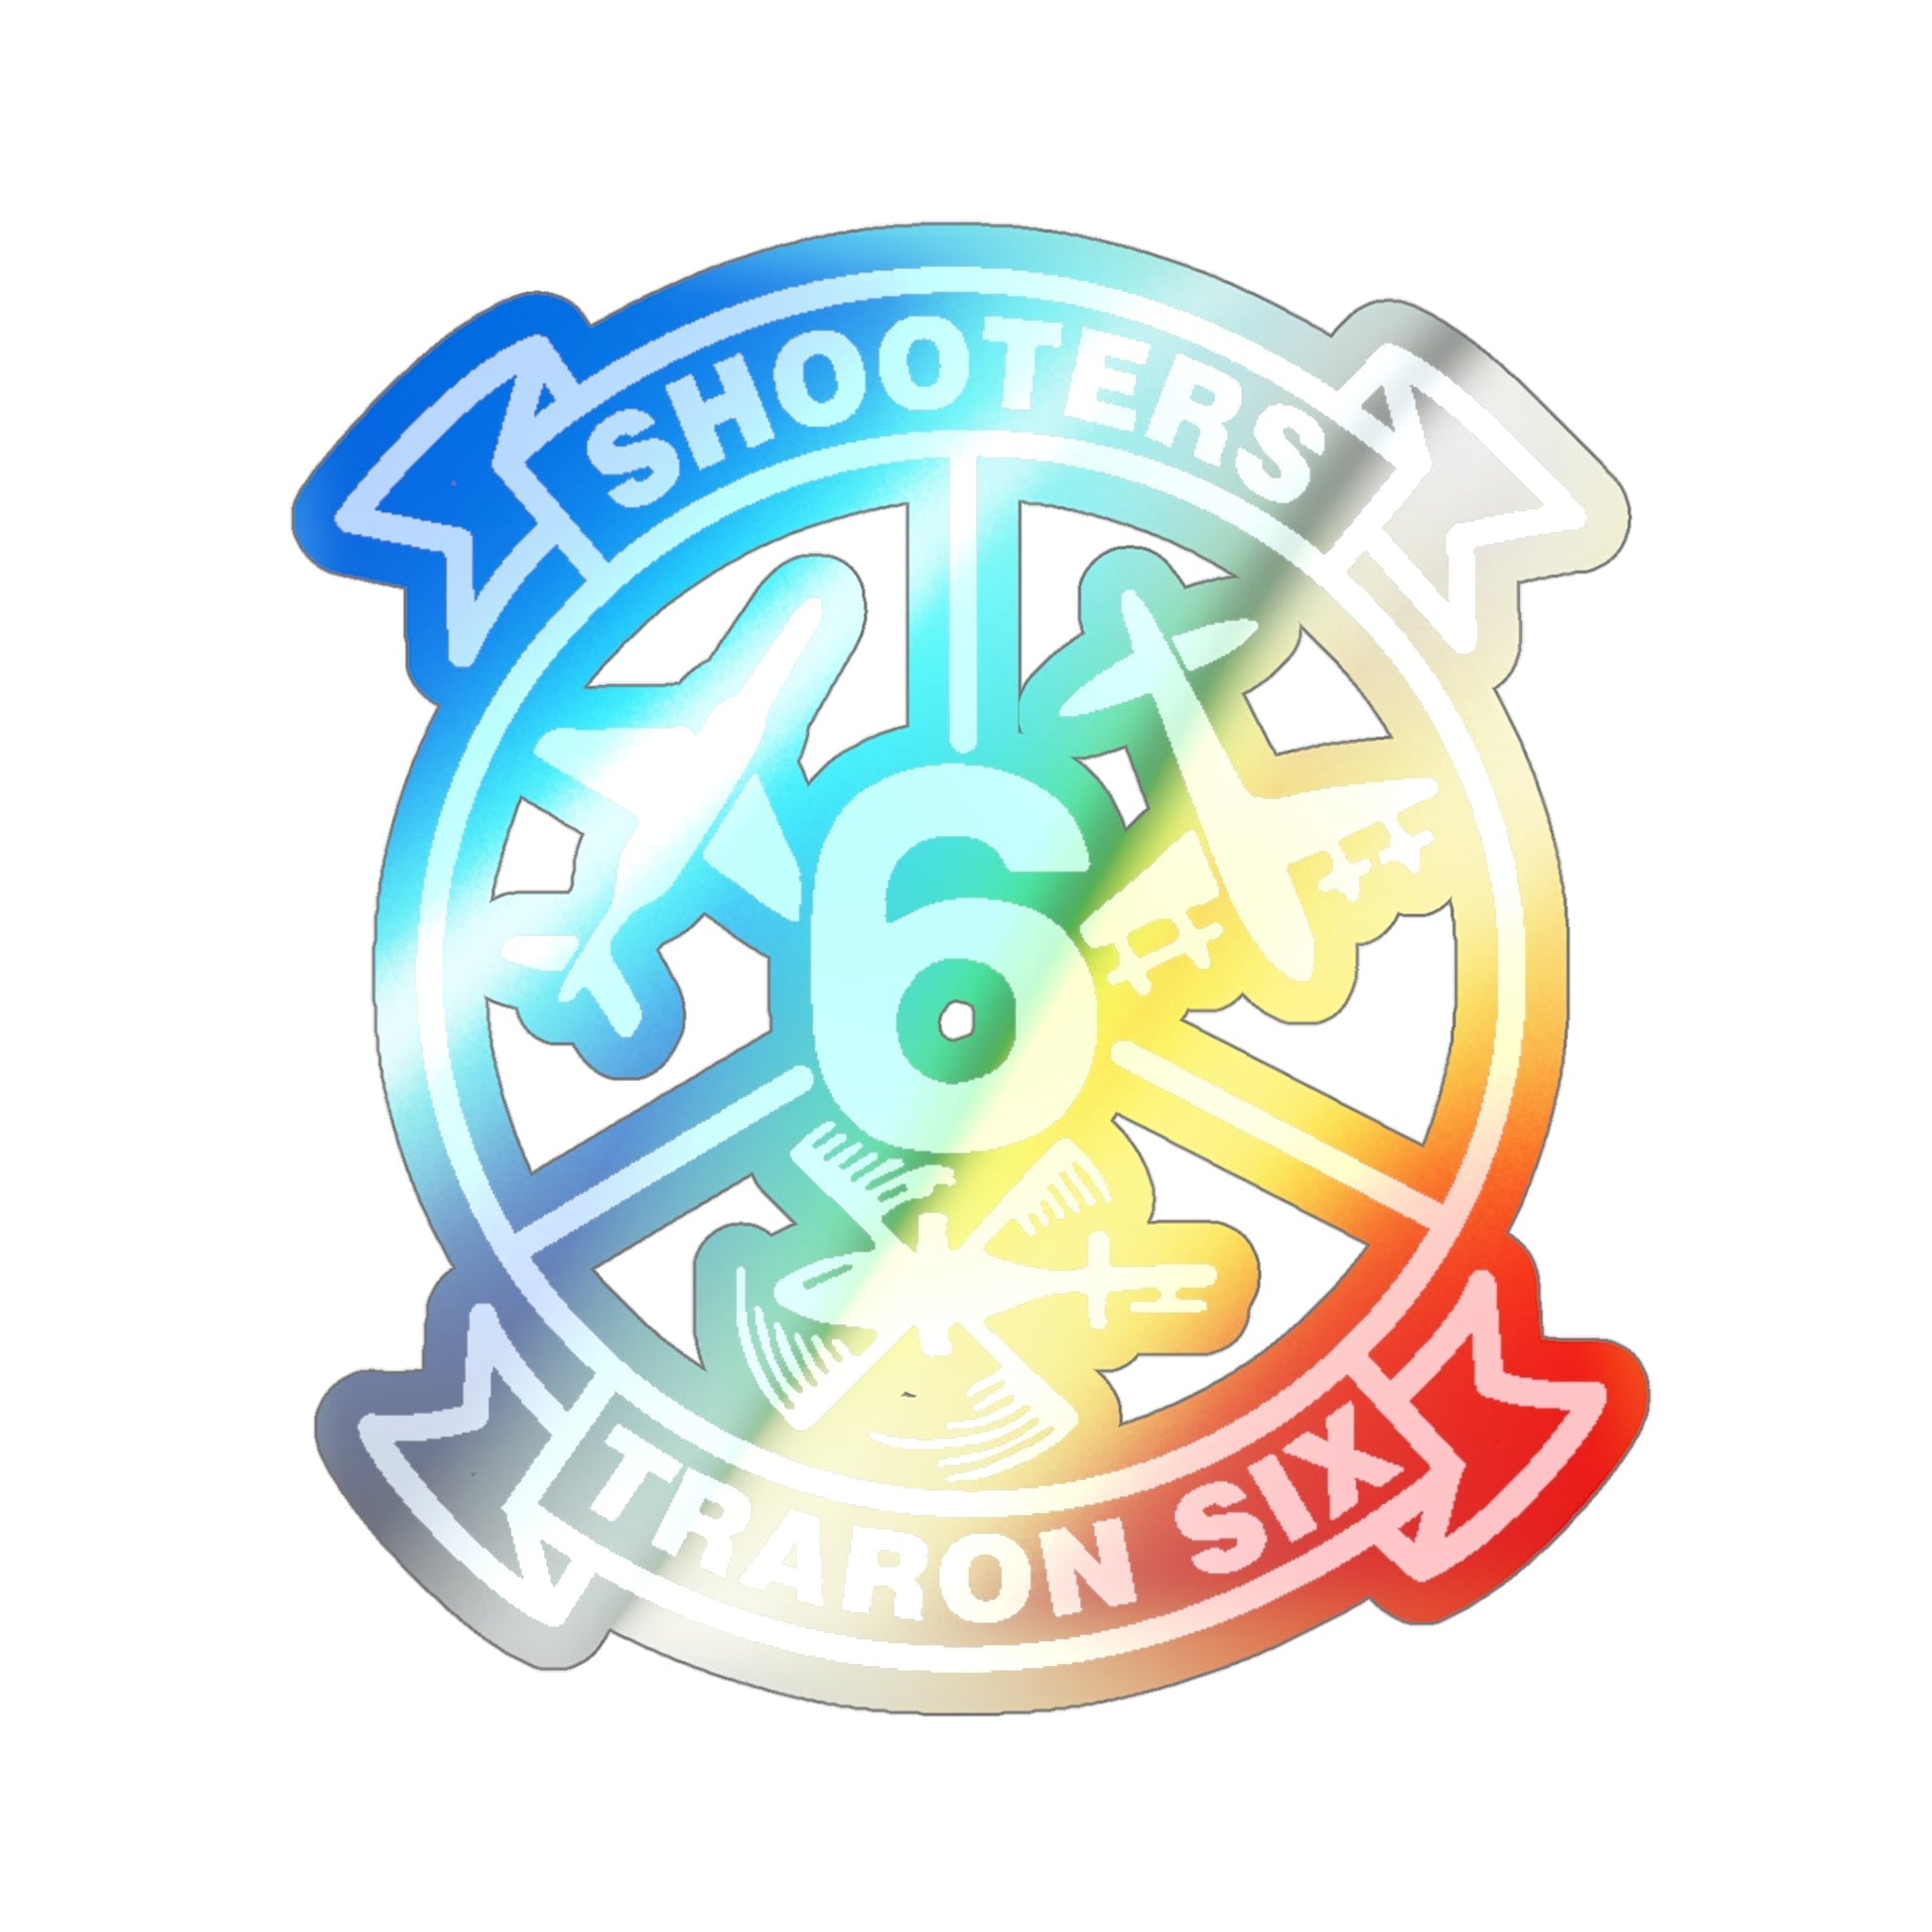 VT 6 TRARON VT6 Shooters (U.S. Navy) Holographic STICKER Die-Cut Vinyl Decal-5 Inch-The Sticker Space